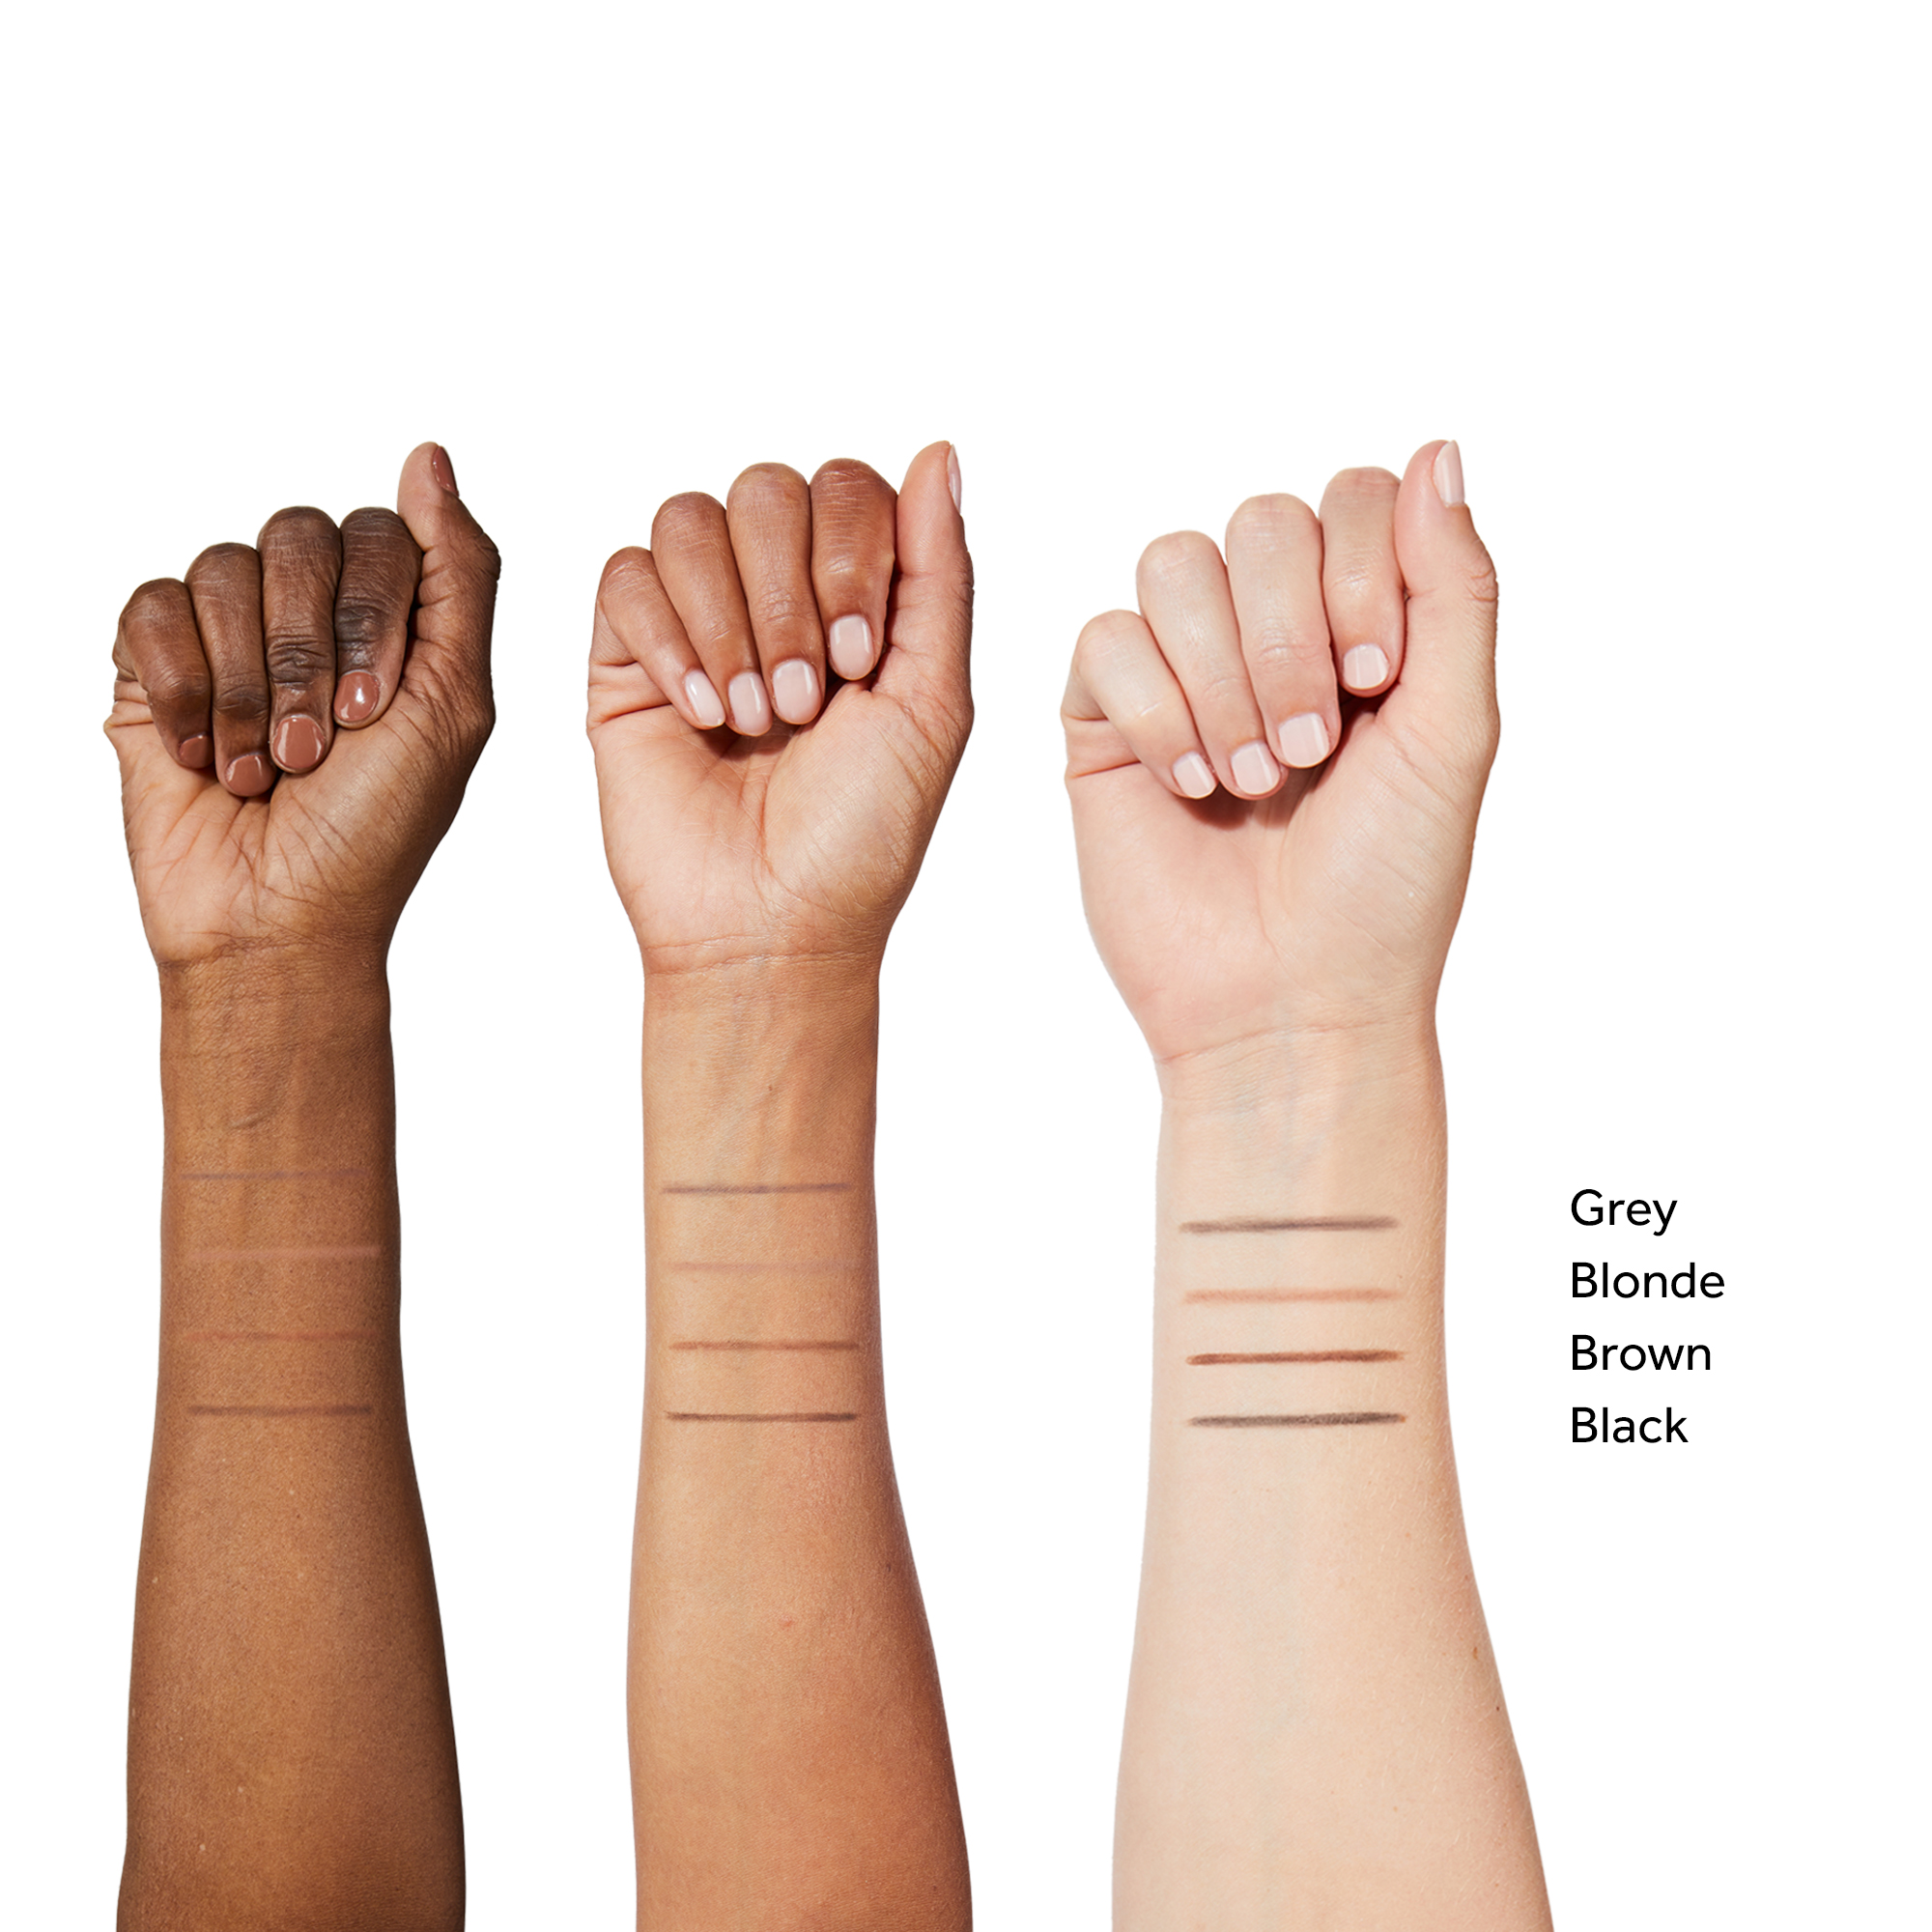 The image shows the different shades applied on arms with different skin tones. There are three arms in total and the shades are as follows, Grey, Blonde, Brown, Black